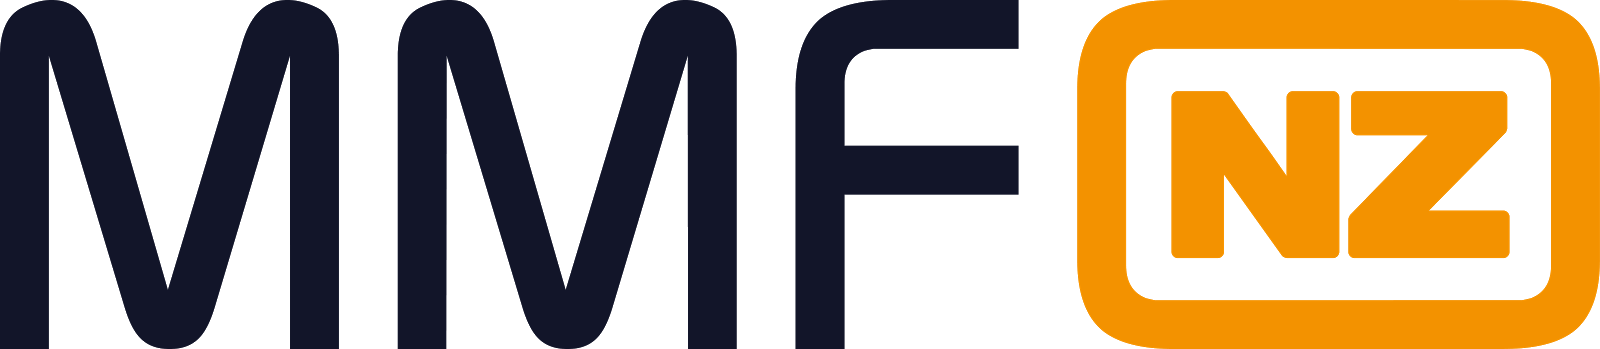 New MMF logo reversed.png